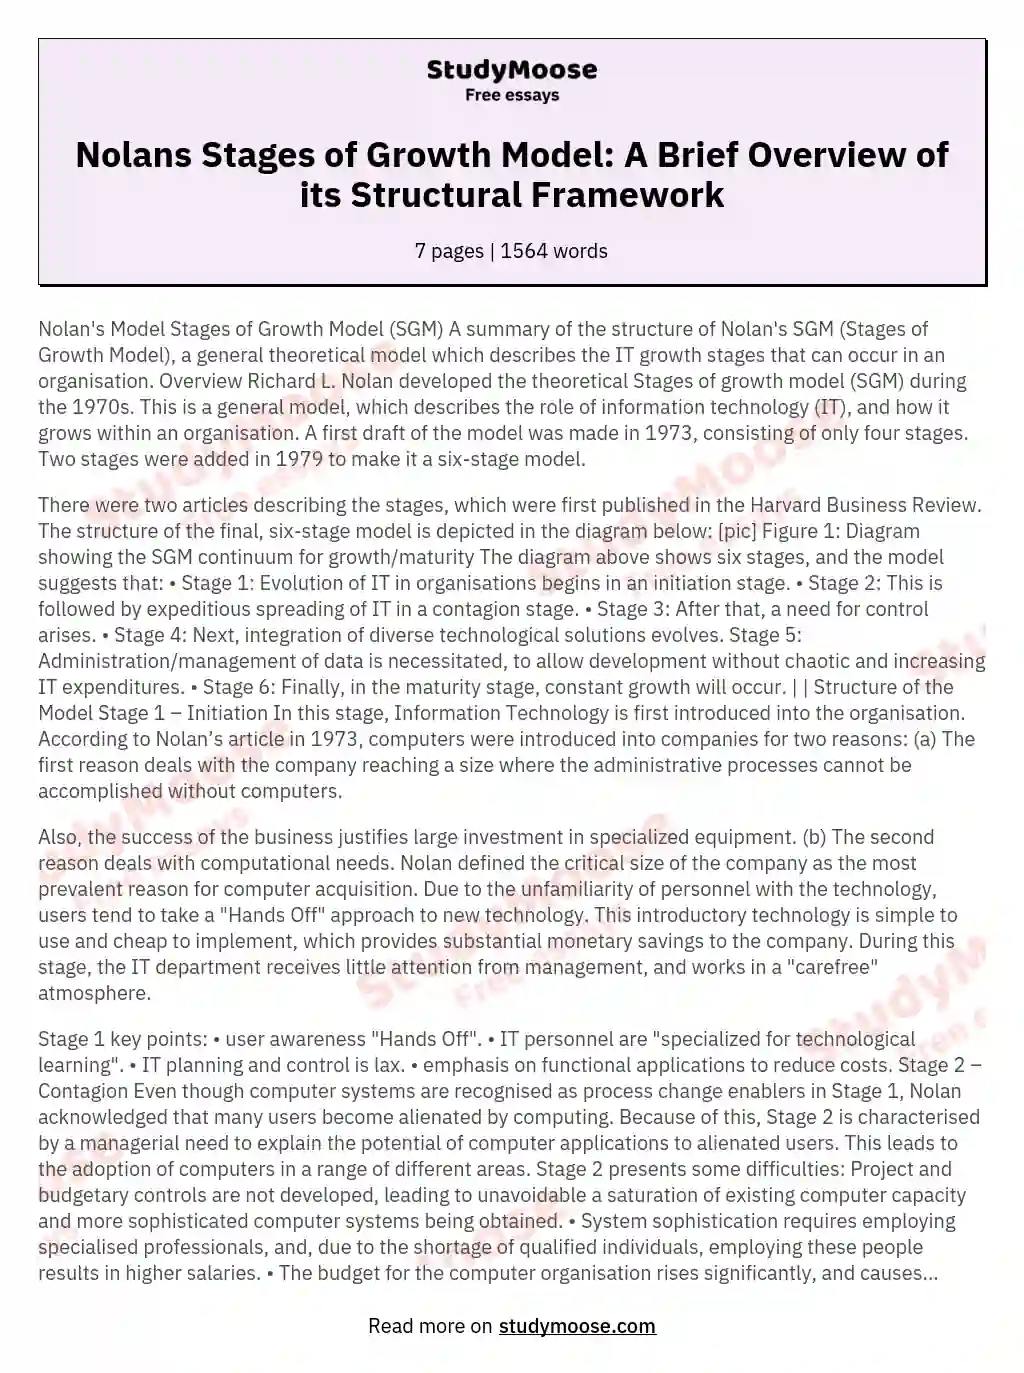 Nolans Stages of Growth Model: A Brief Overview of its Structural Framework essay